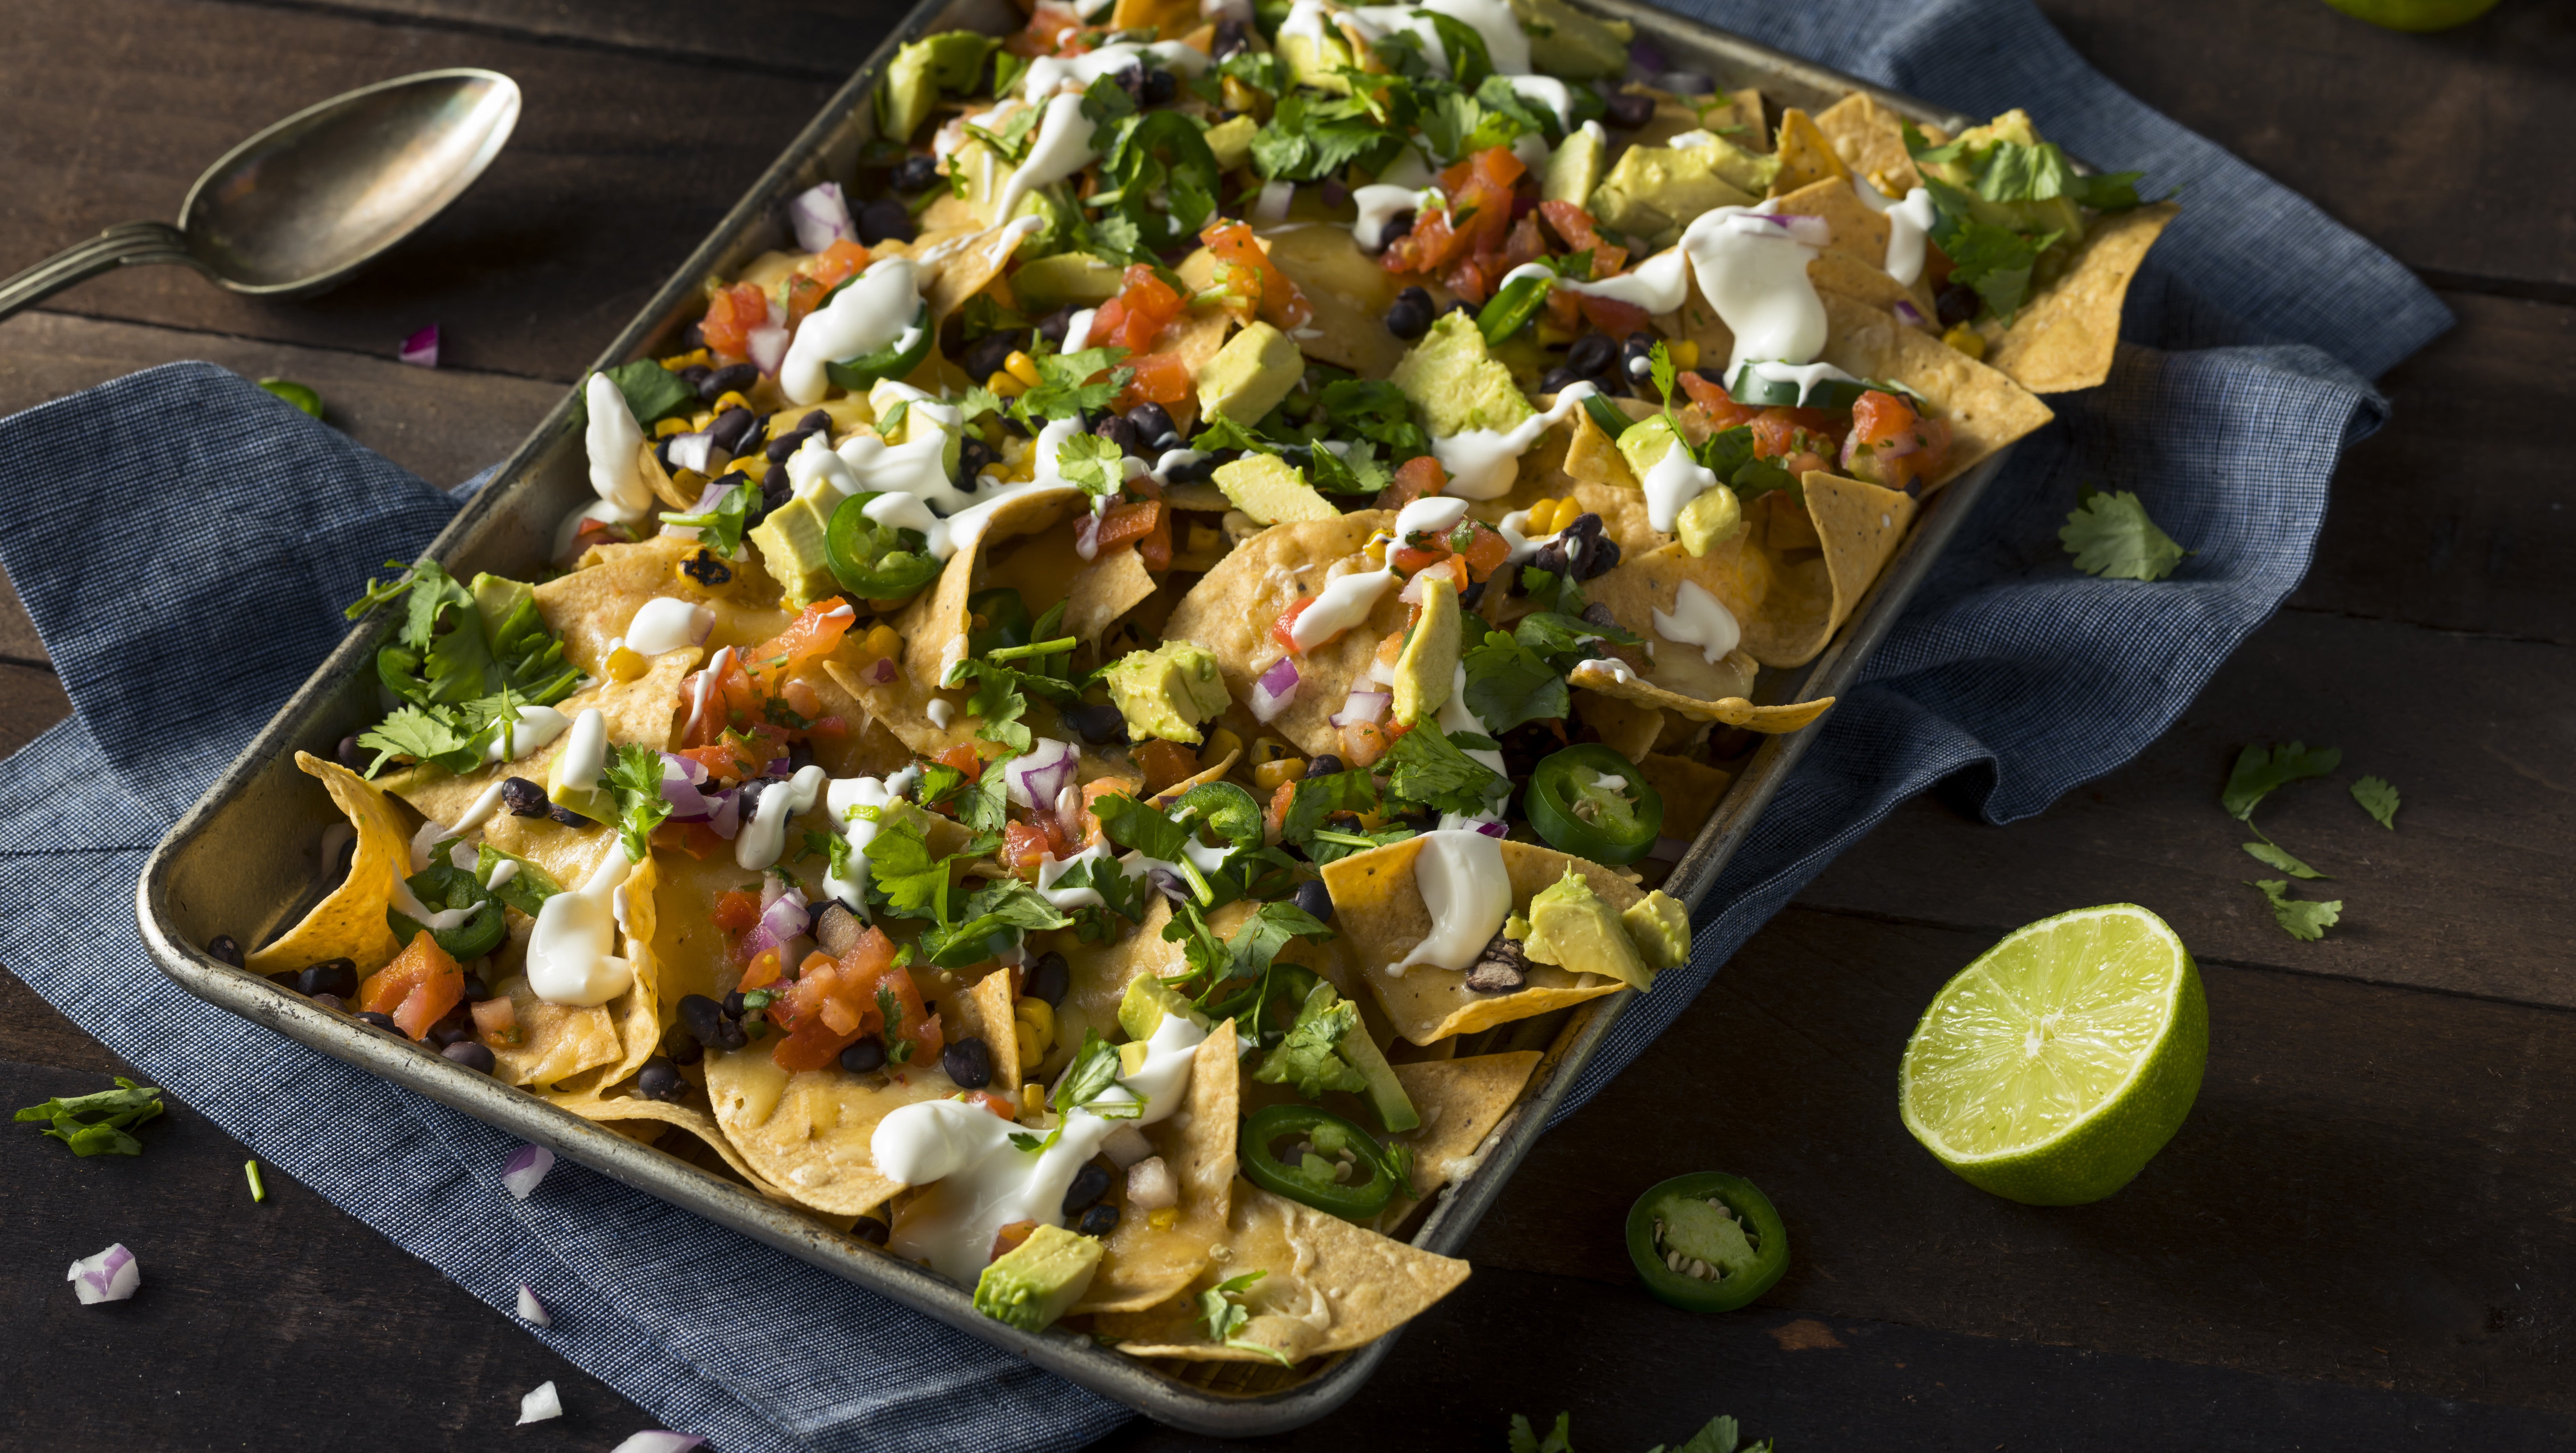 Pile Your Holiday Leftovers On Nachos